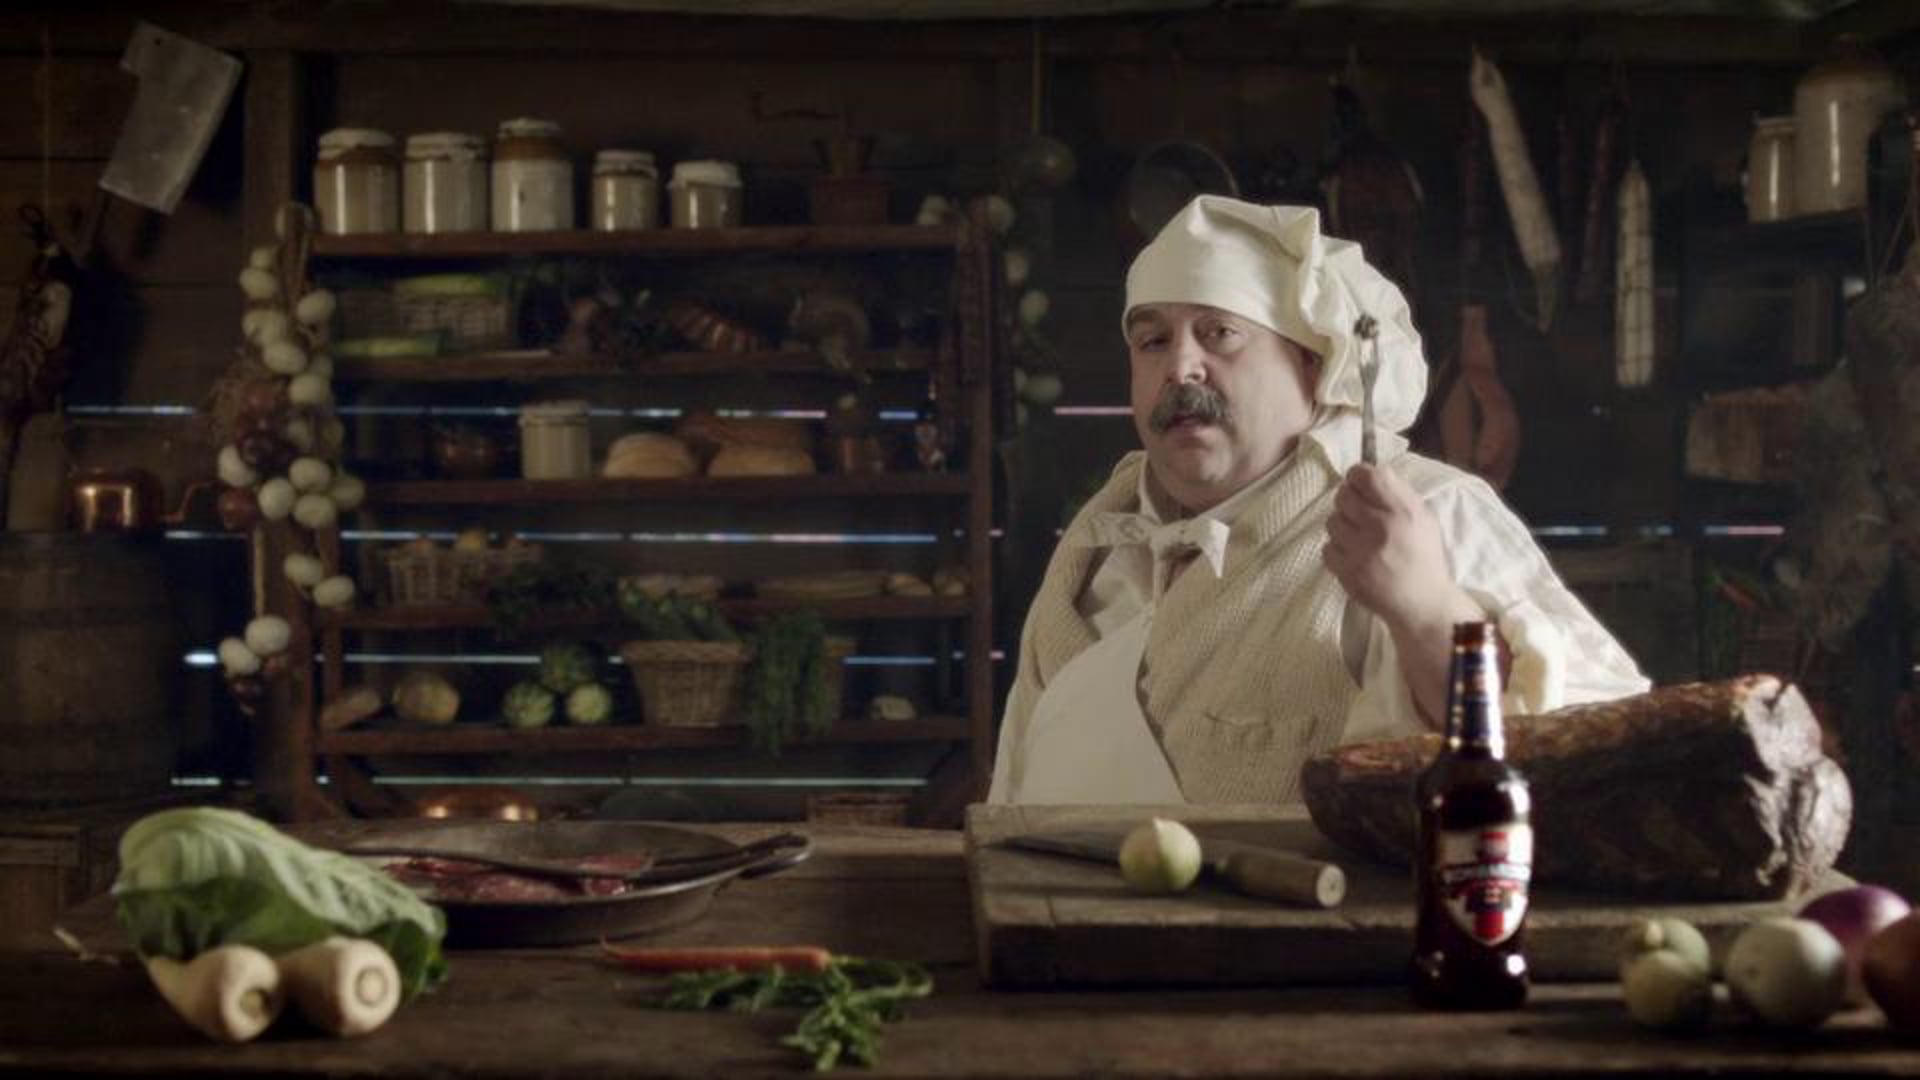 Sausage - Bombardier Idents for Dave, 2012